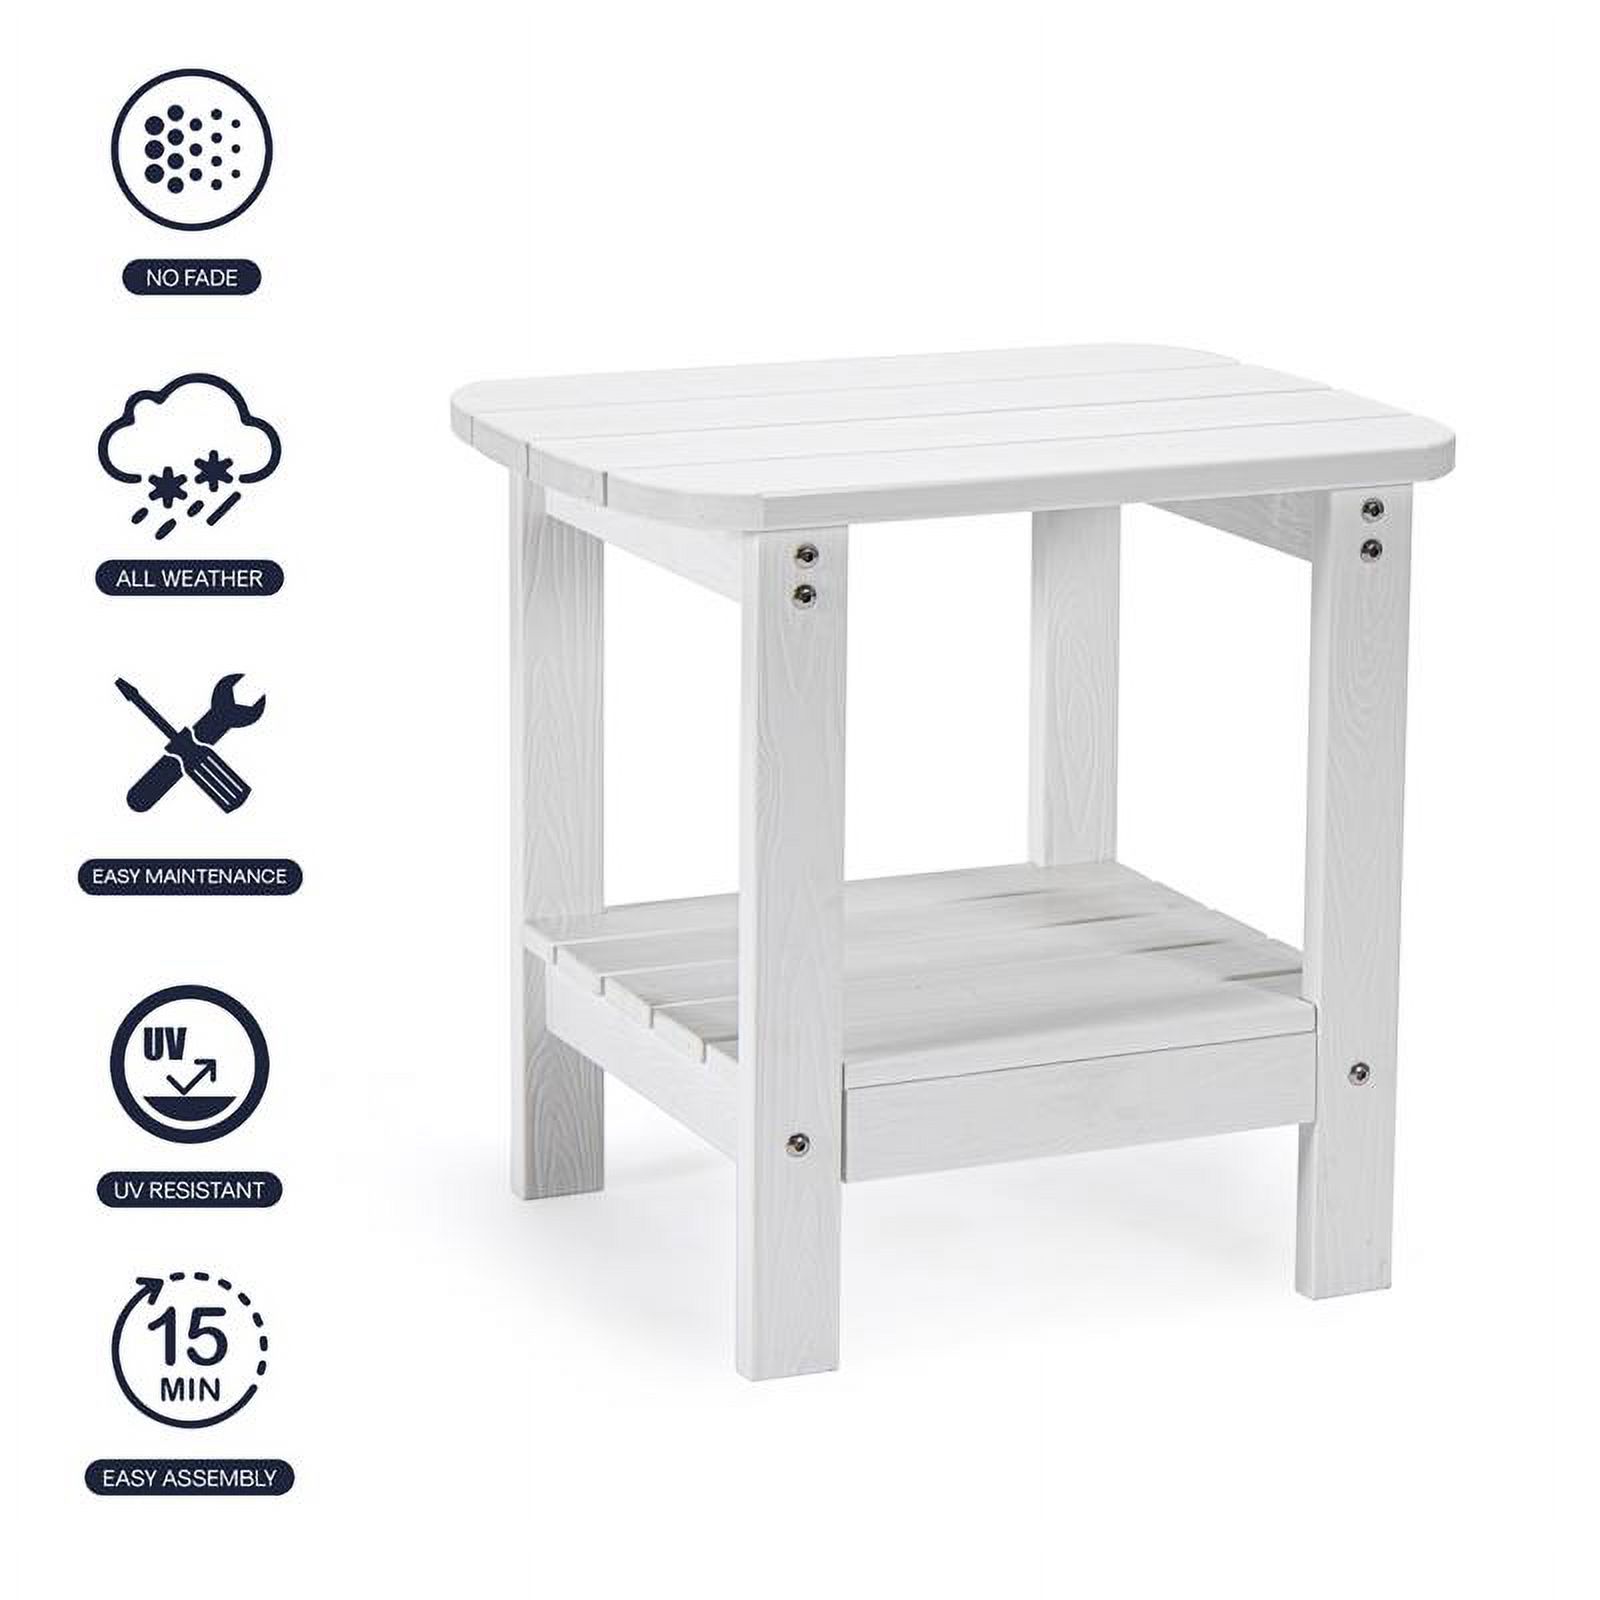 Posh Living Clive Outdoor Side Table White - image 4 of 9